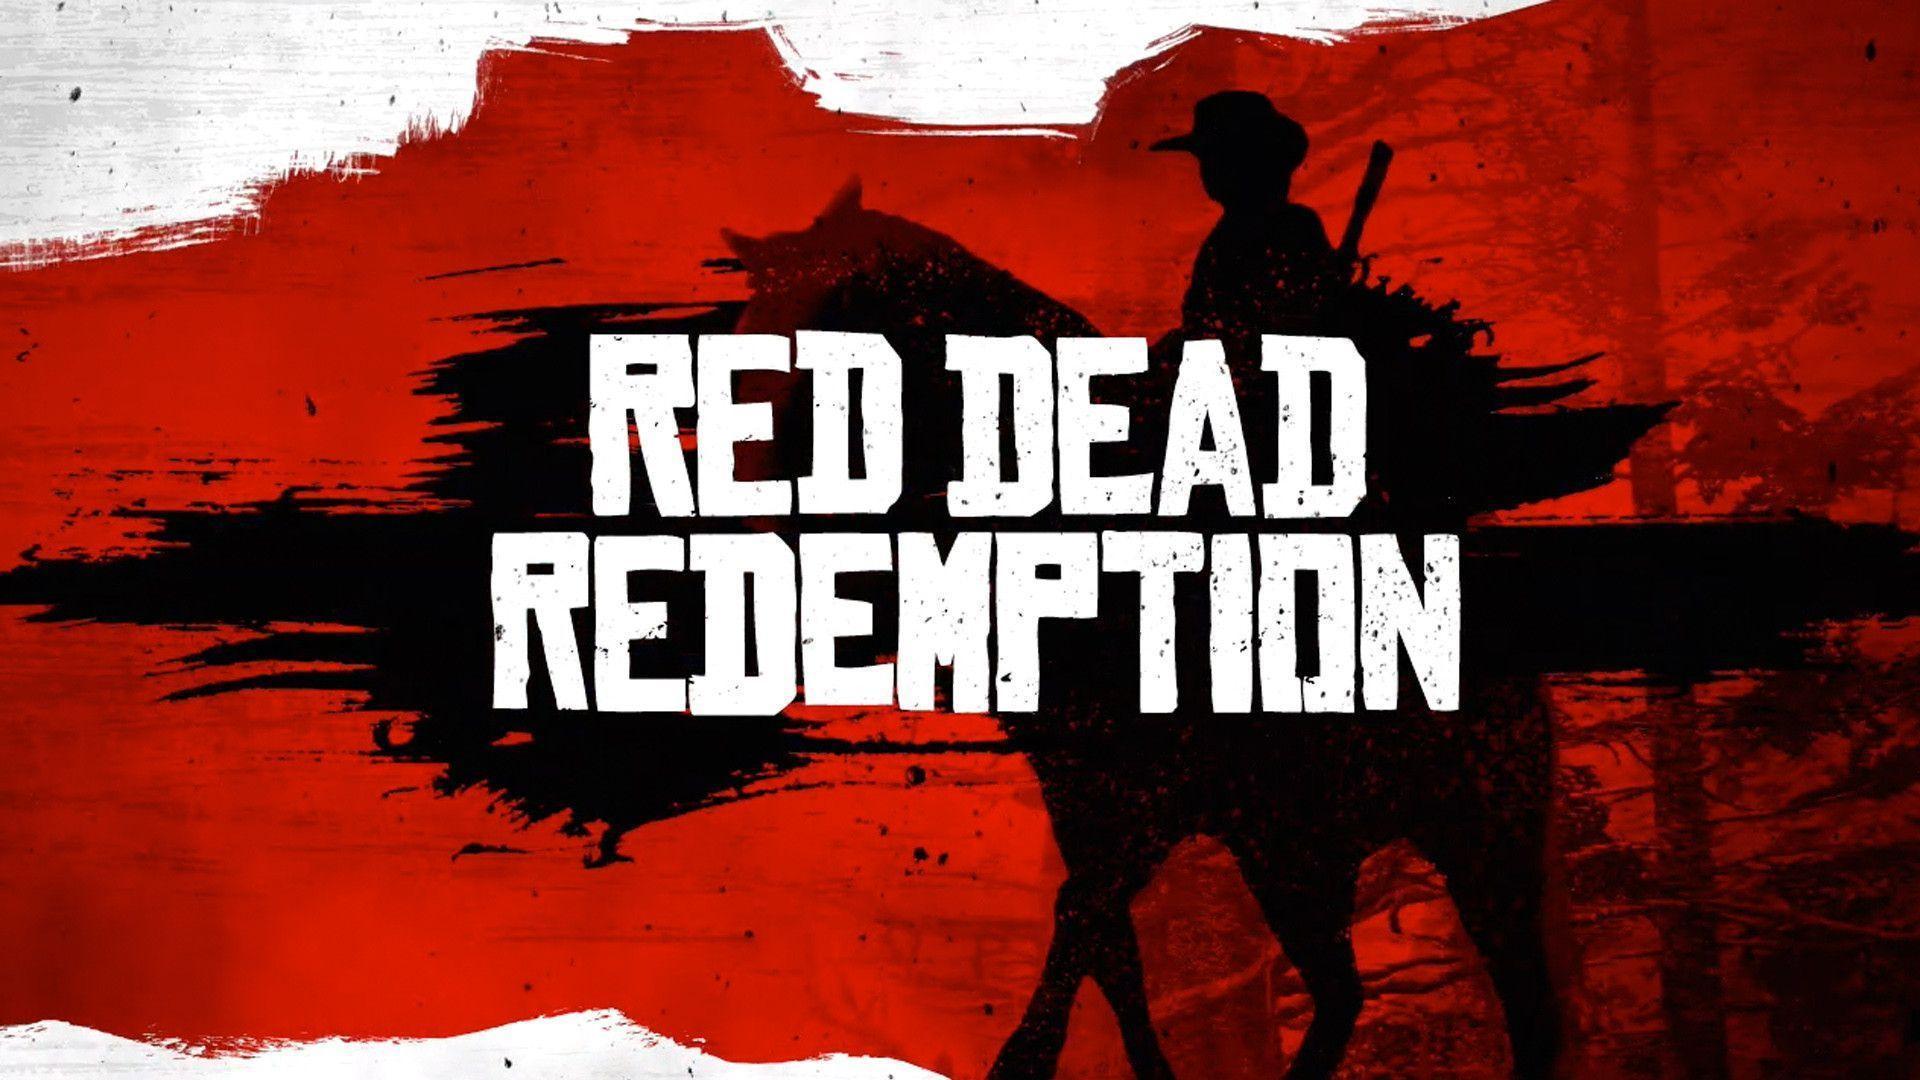 Let’s Play Red Dead Redemption